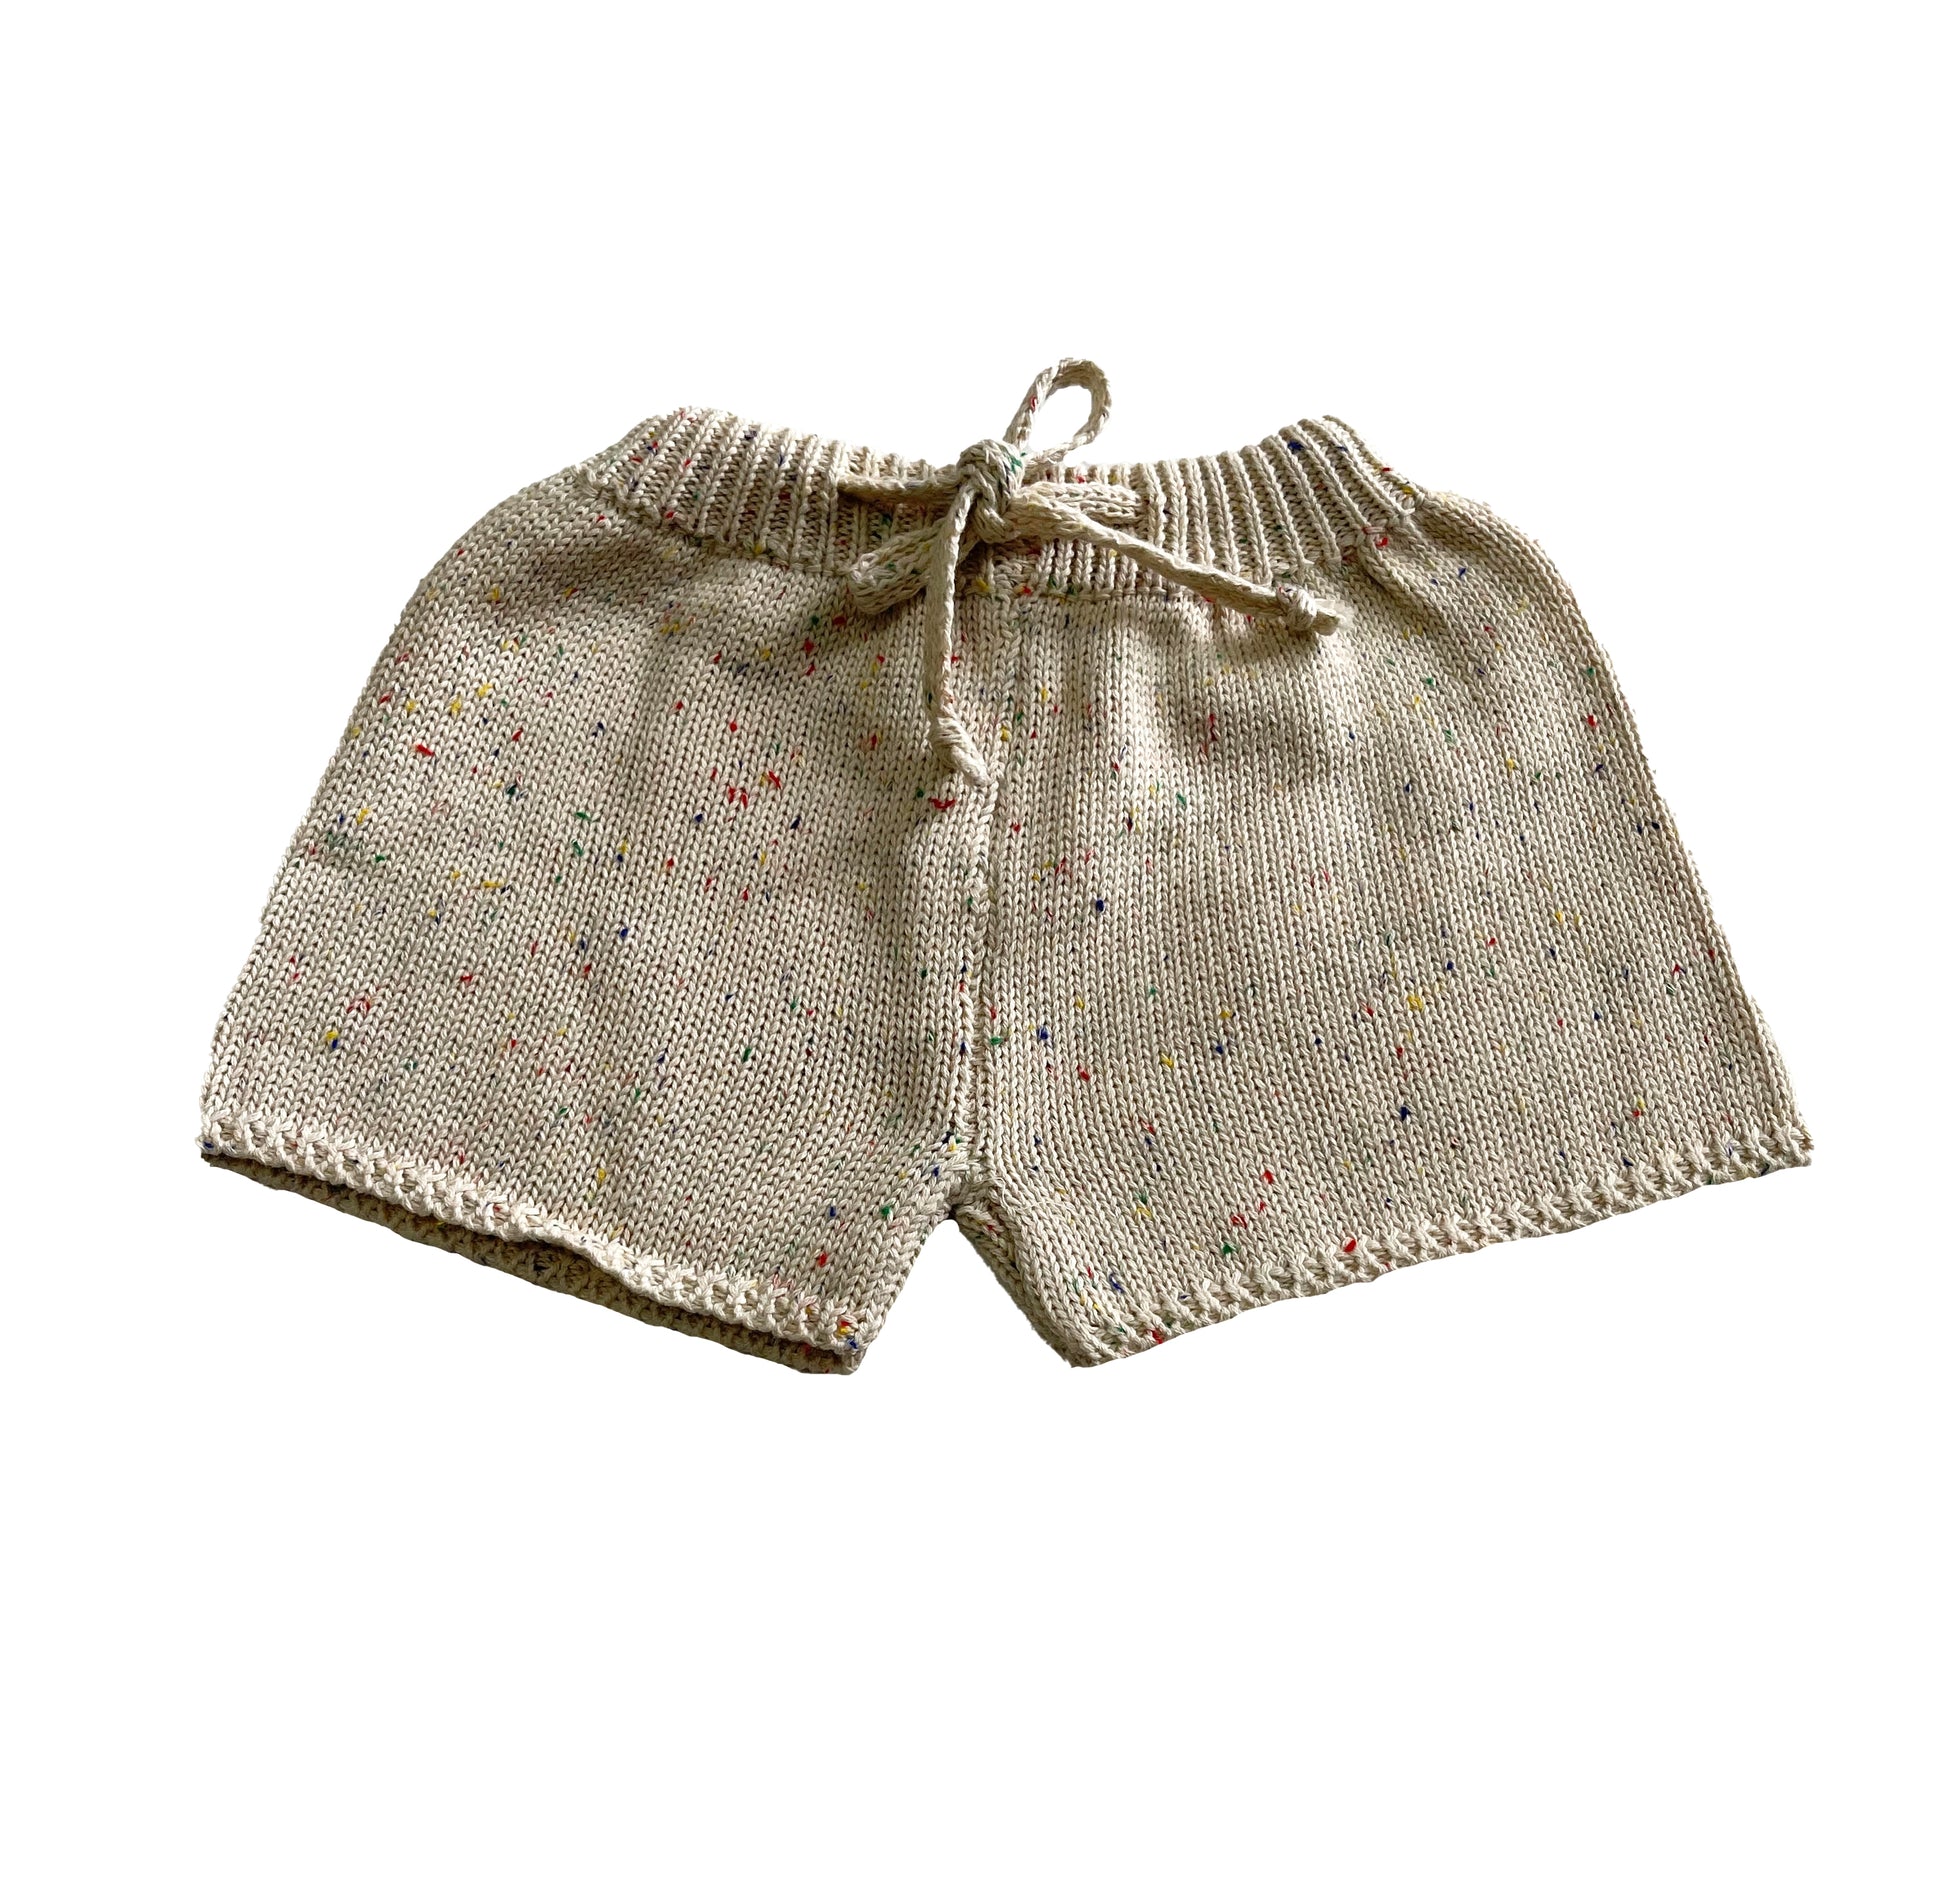 Charlie knitted shorts - Bibs and Bobs NZ